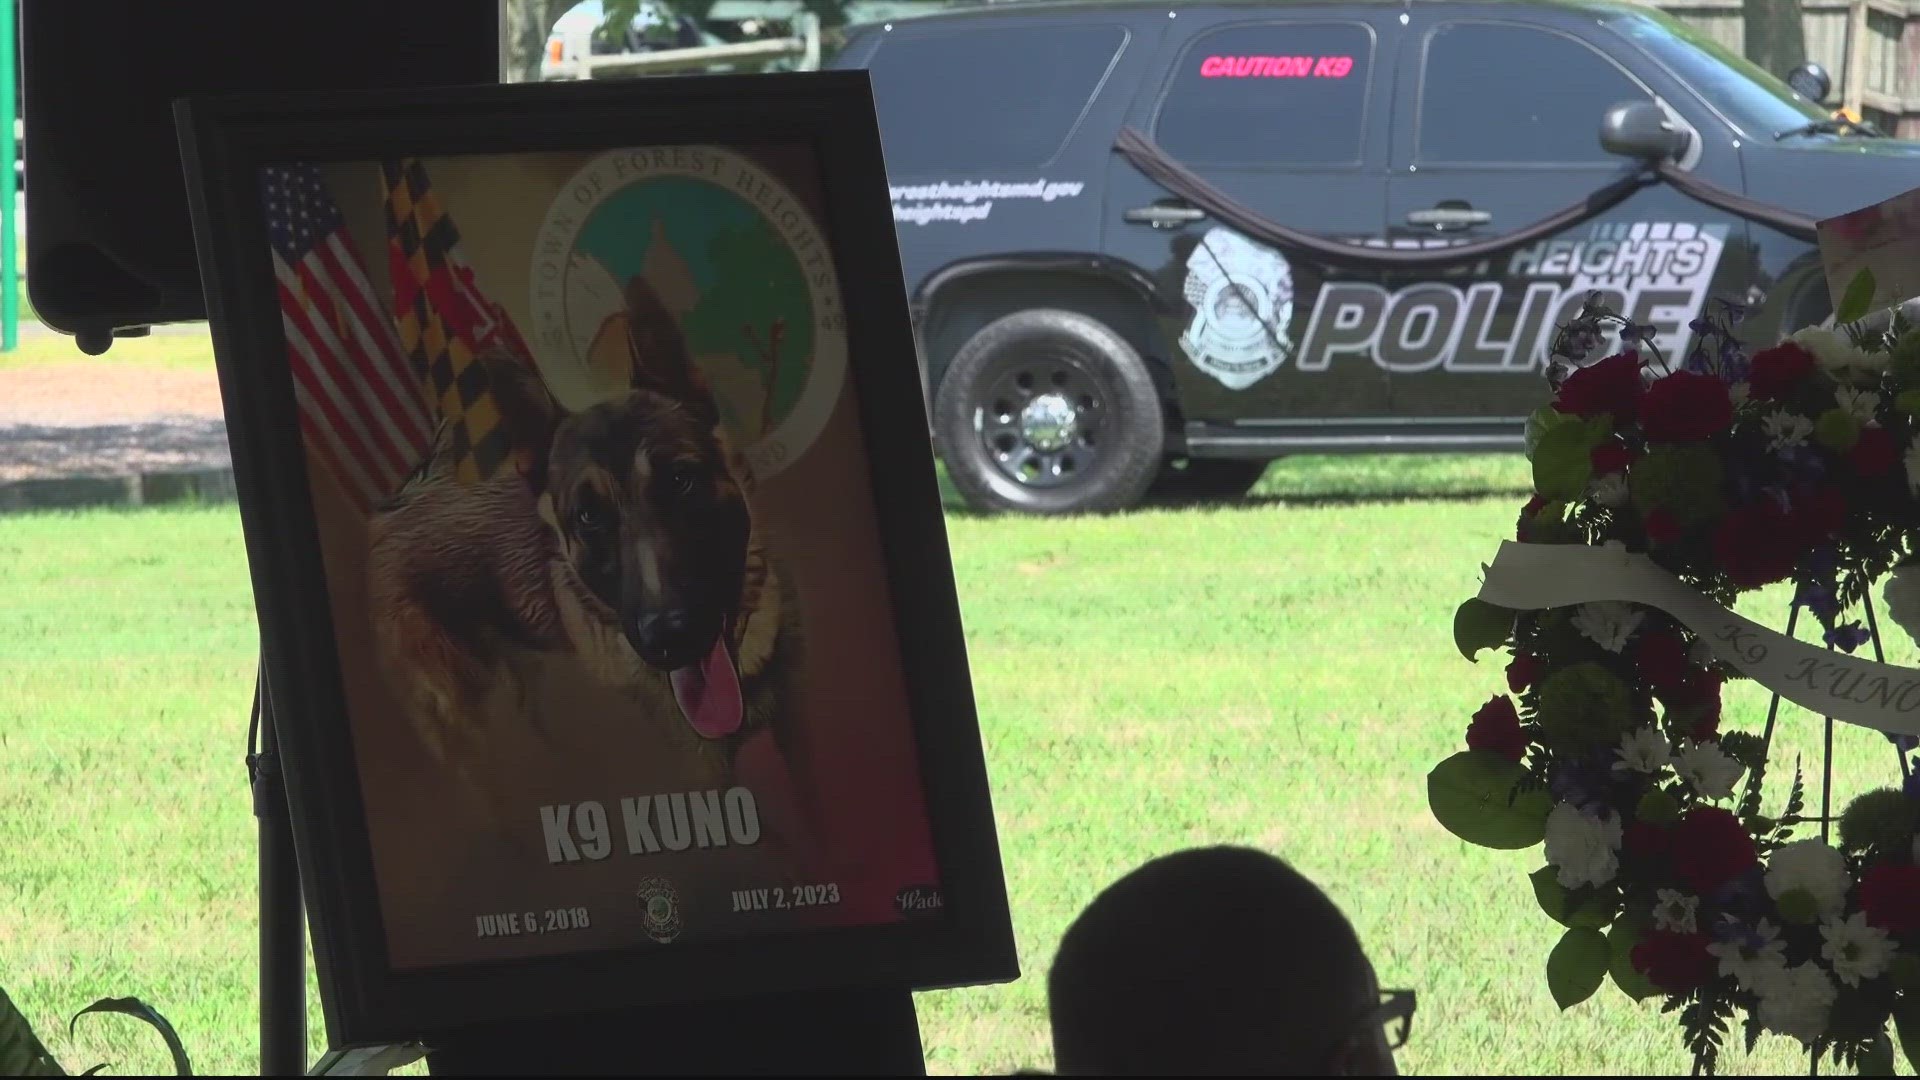 The 5-year-old German Shepherd suffered a medical emergency while helping Prince George's County Police with a robbery call